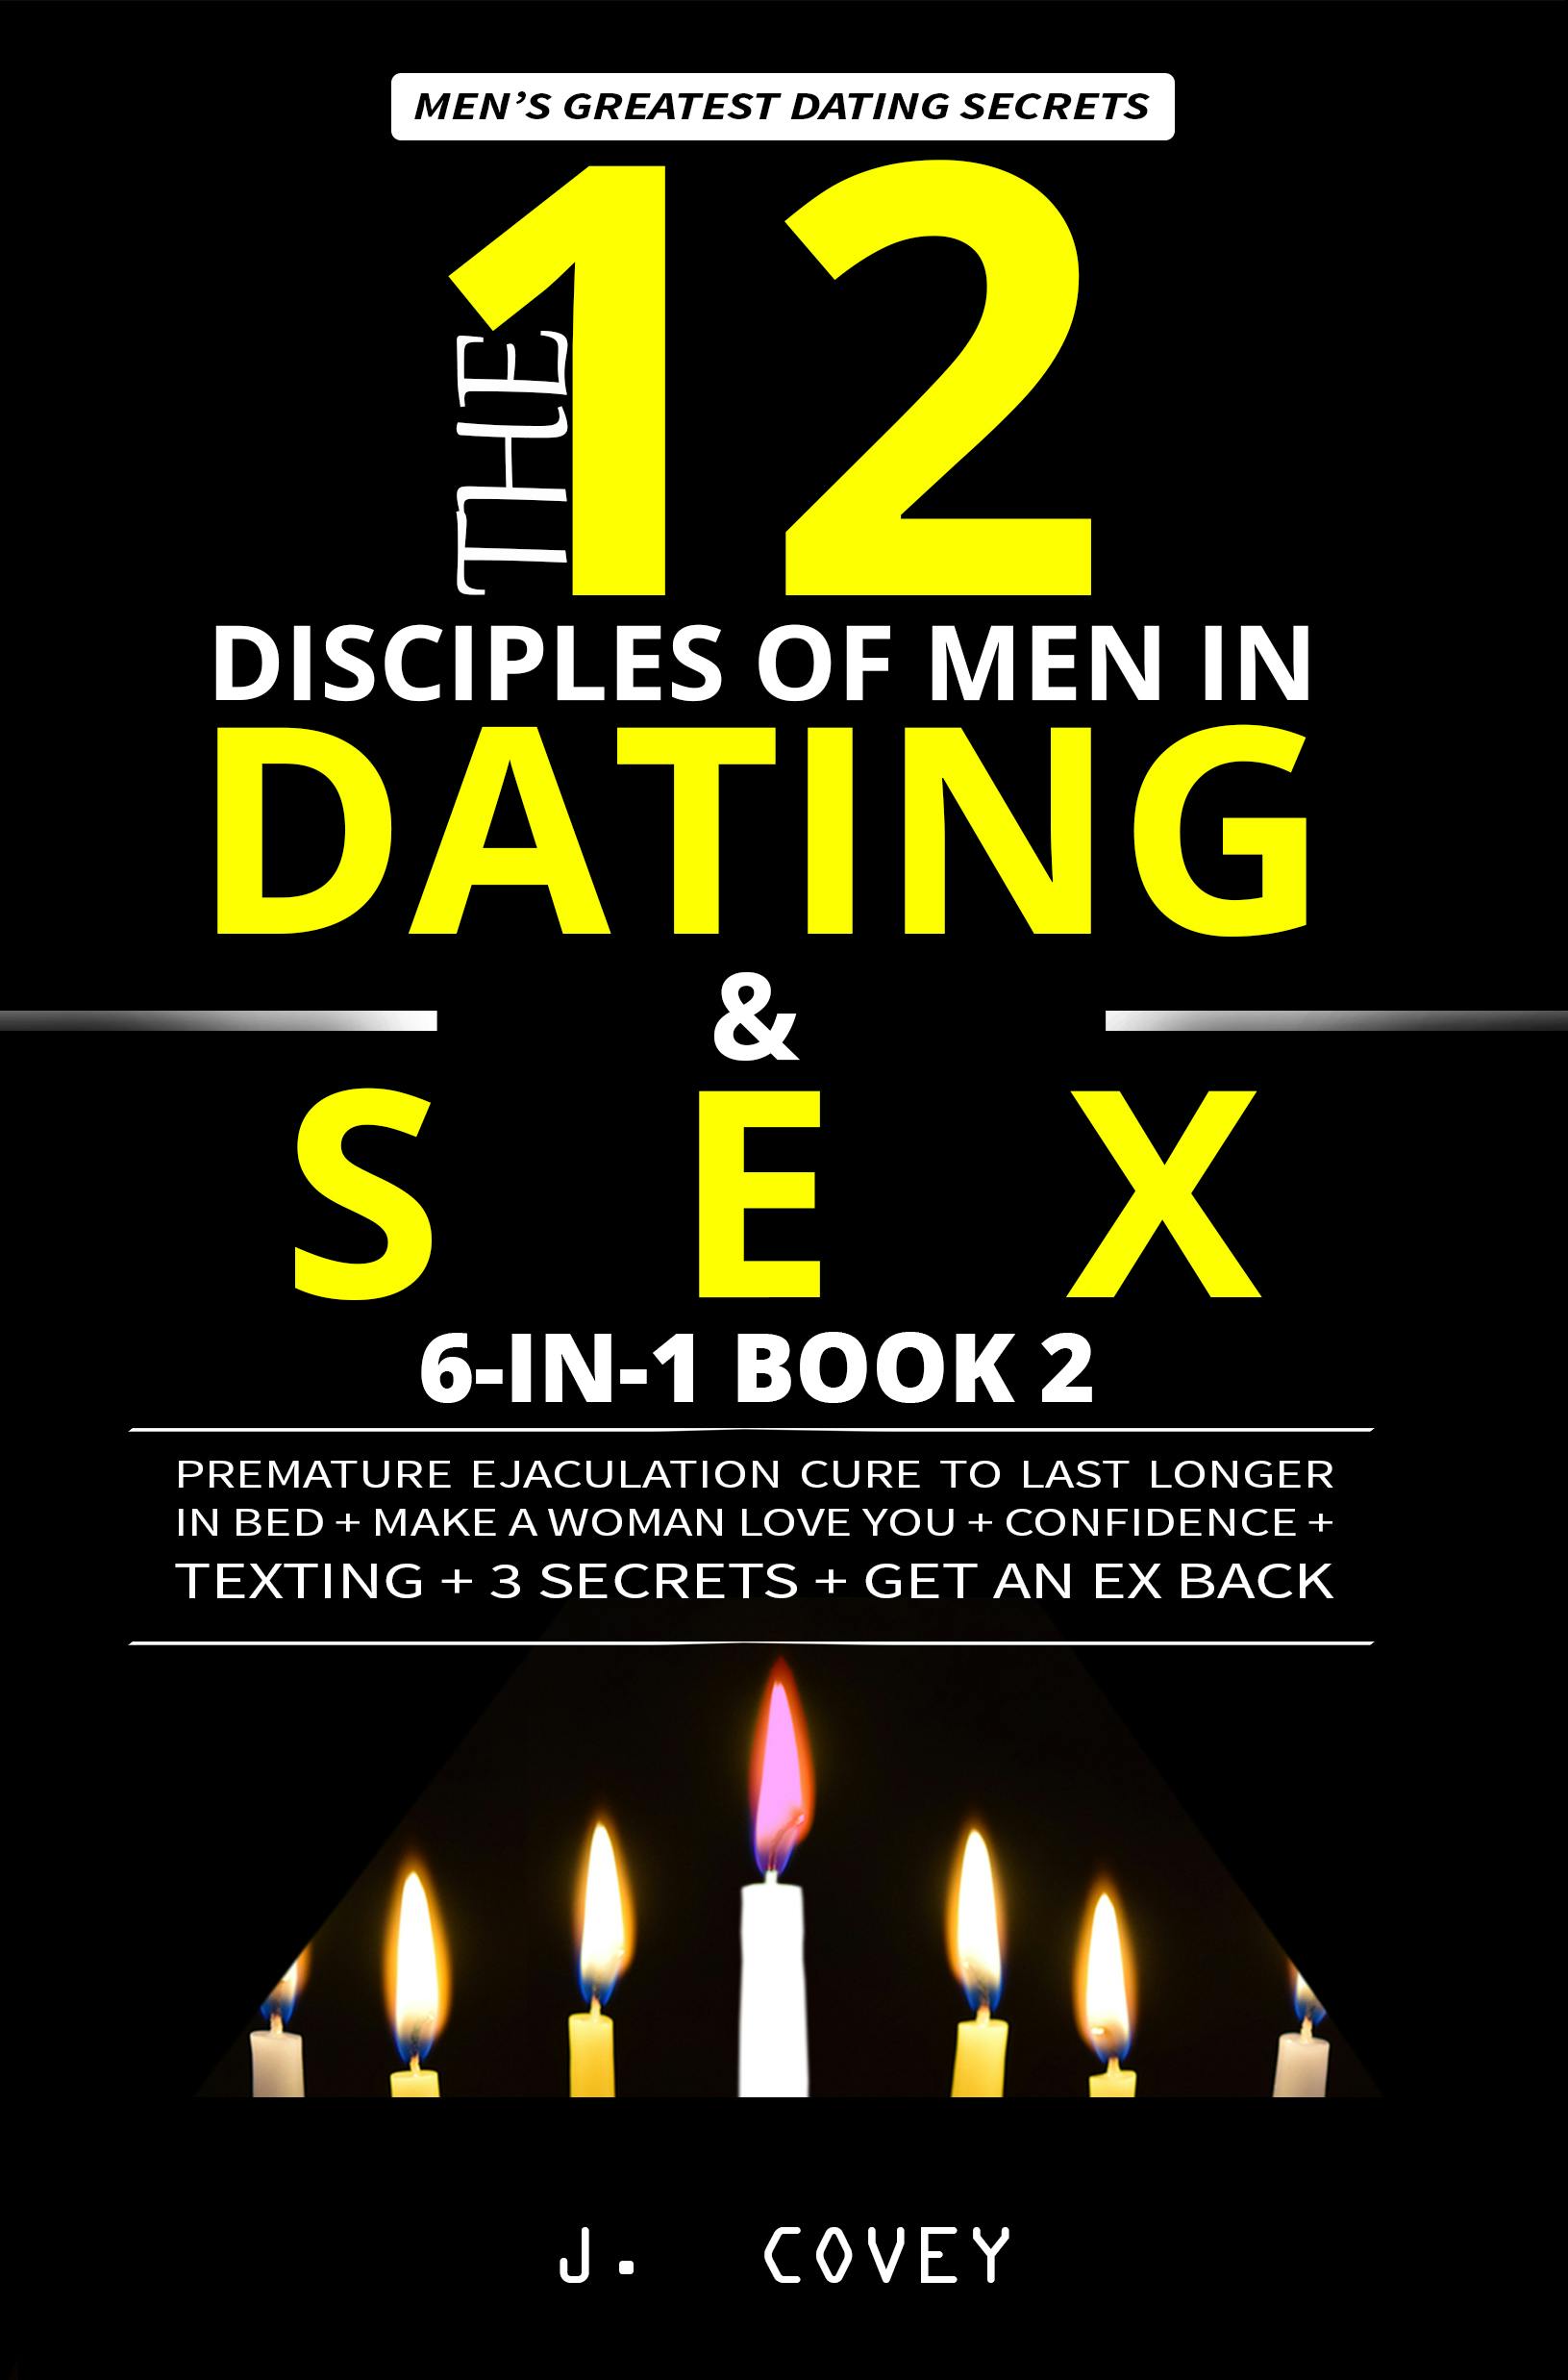 The 12 Disciples of MEN in Dating & SEX - J. Covey